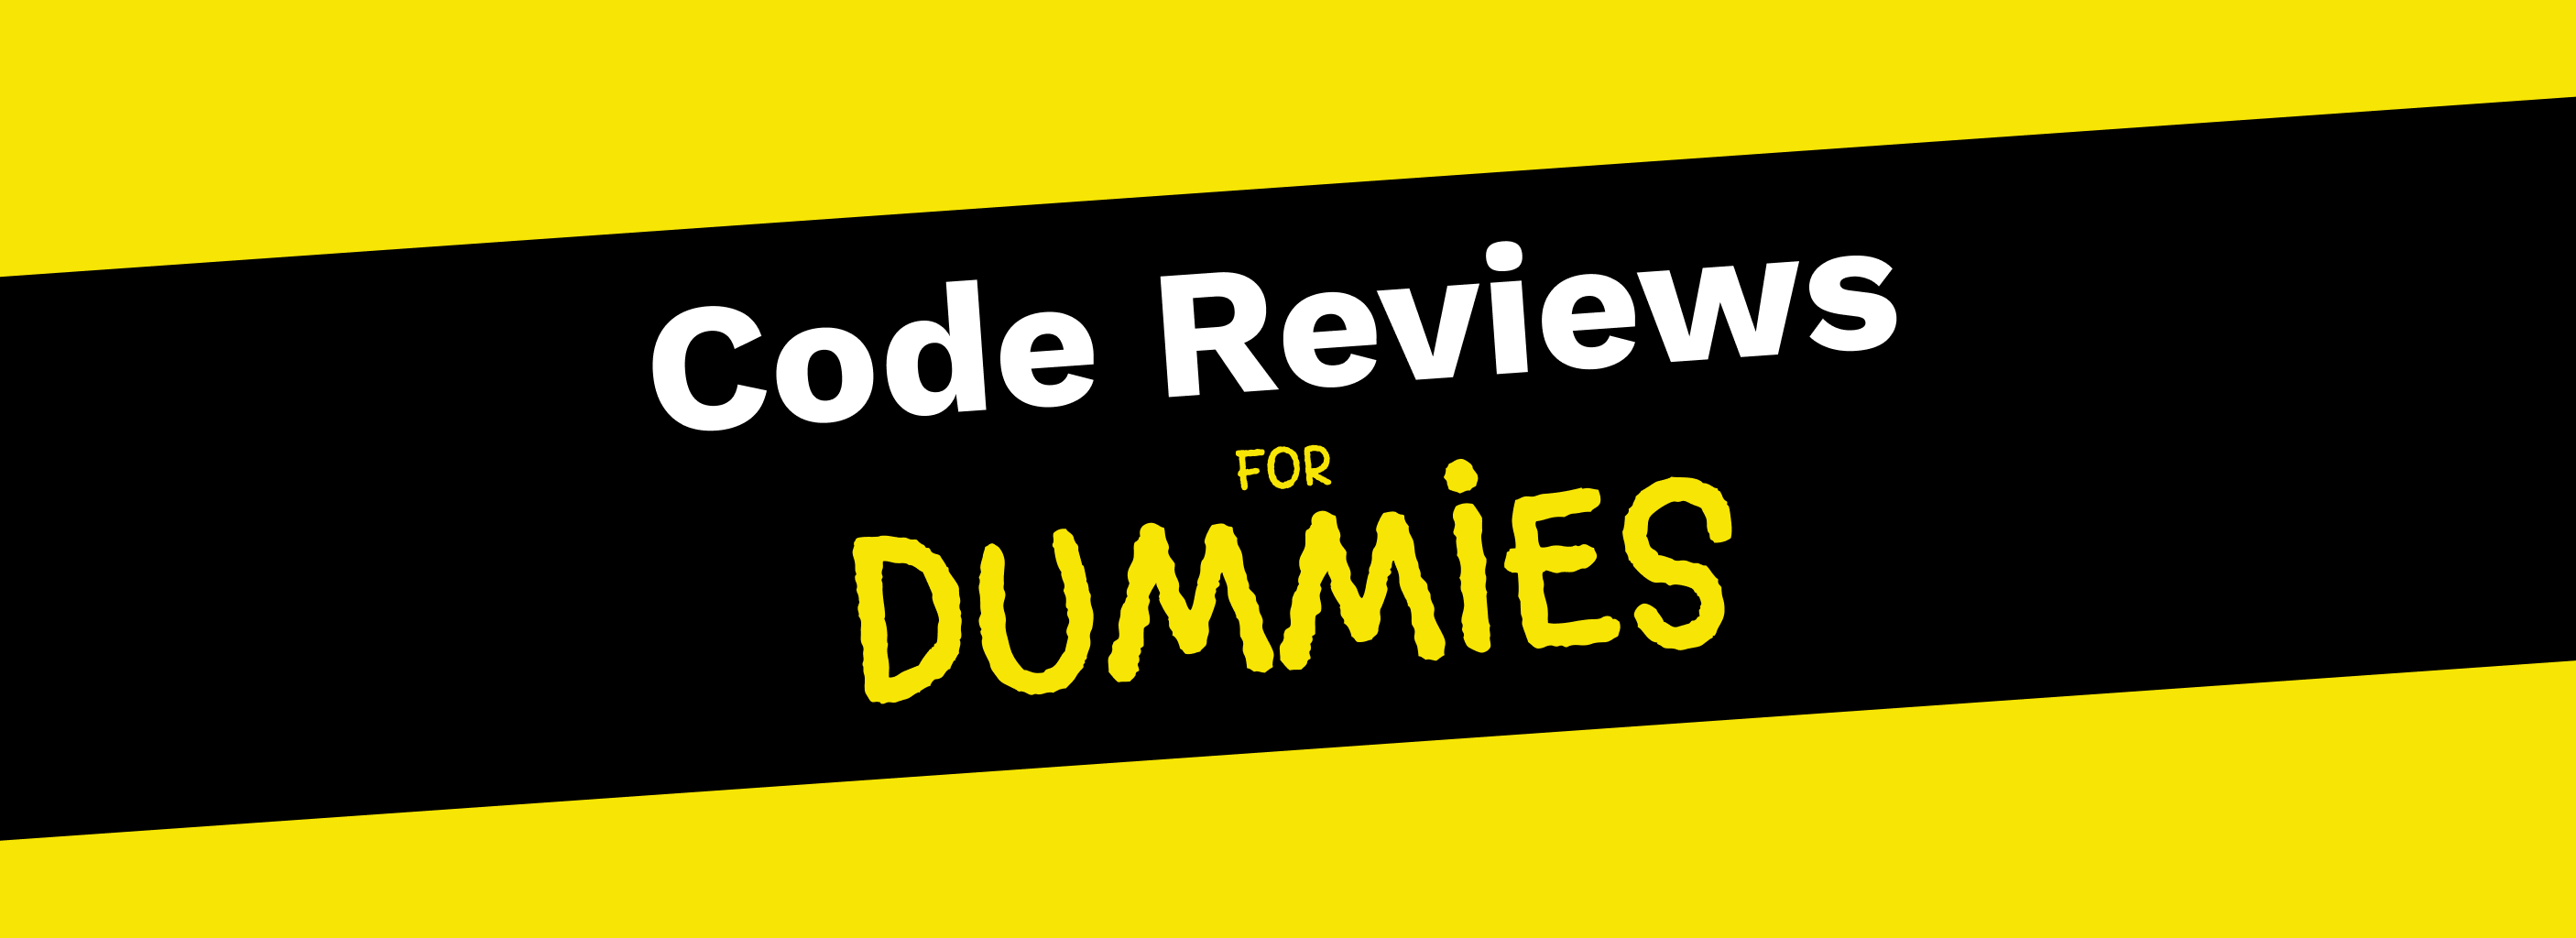 Code reviews for dummies